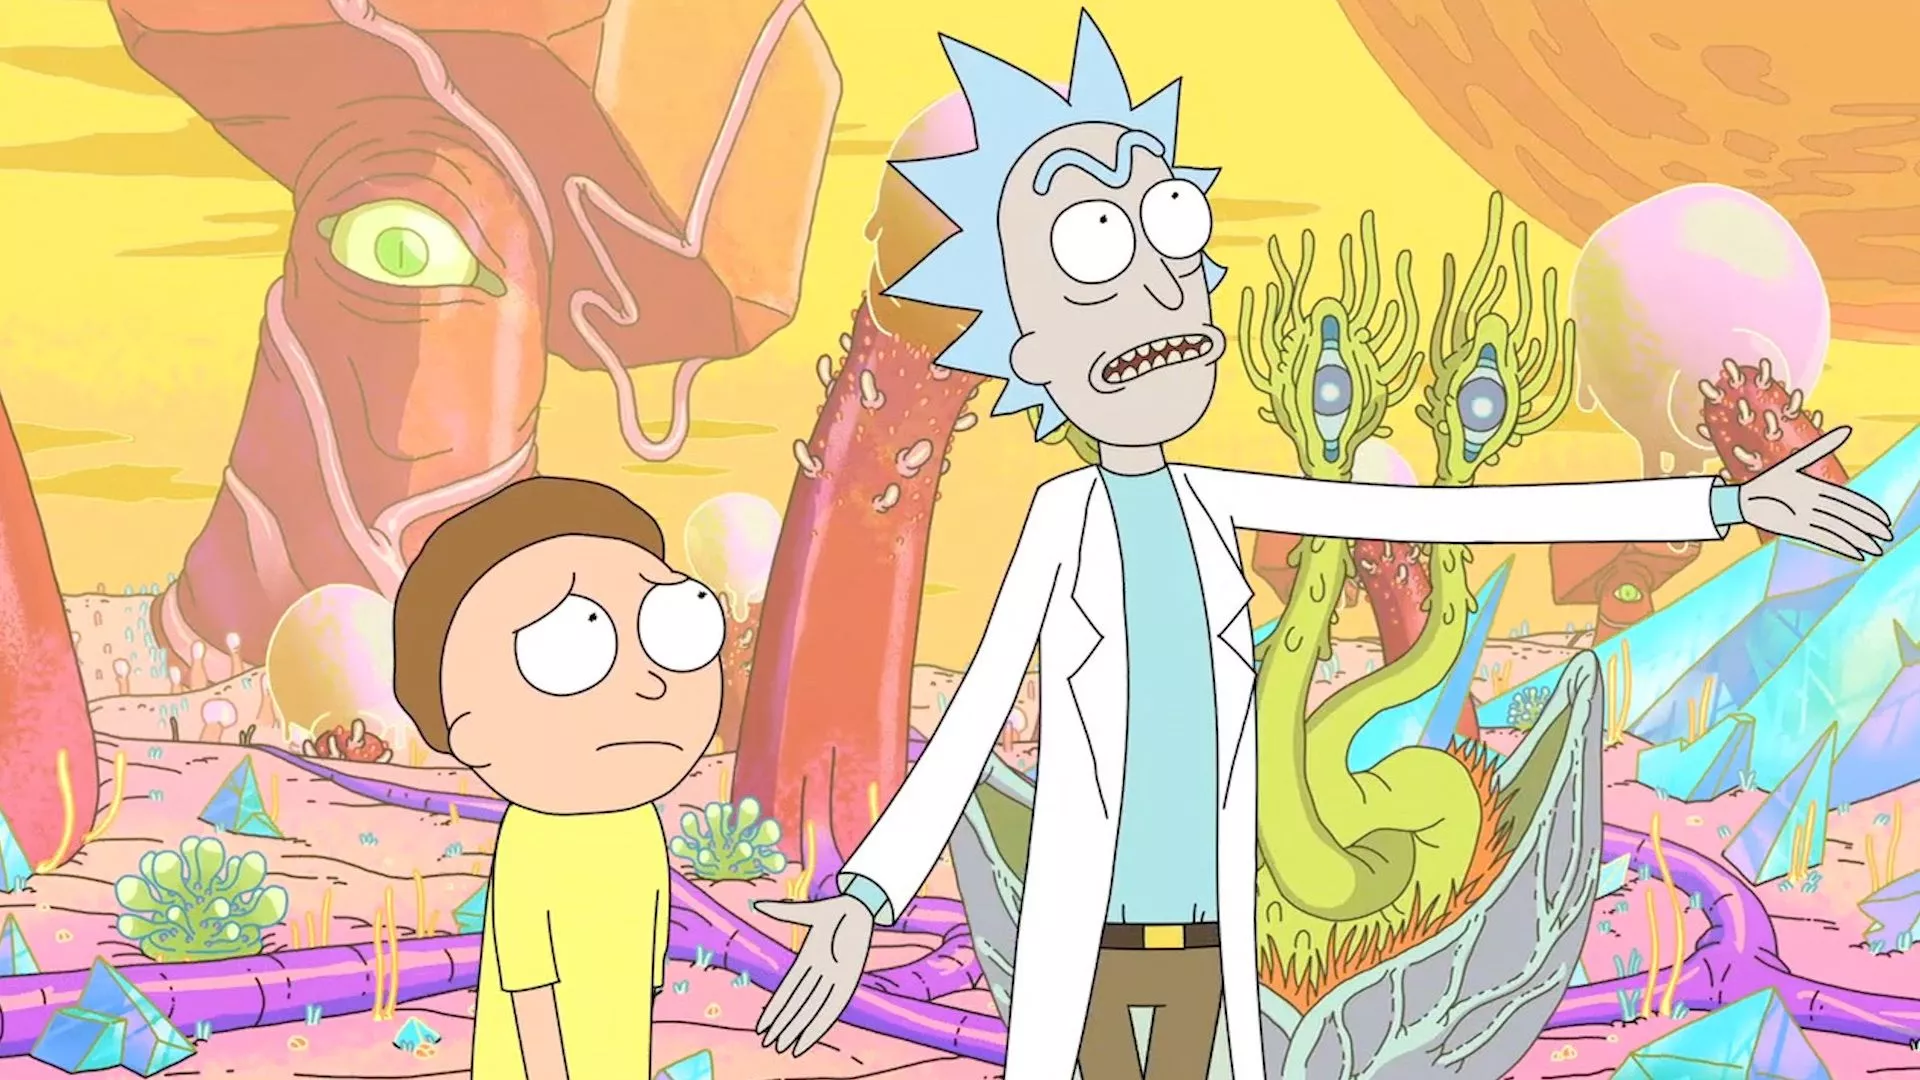 Rick and Morty in TV show